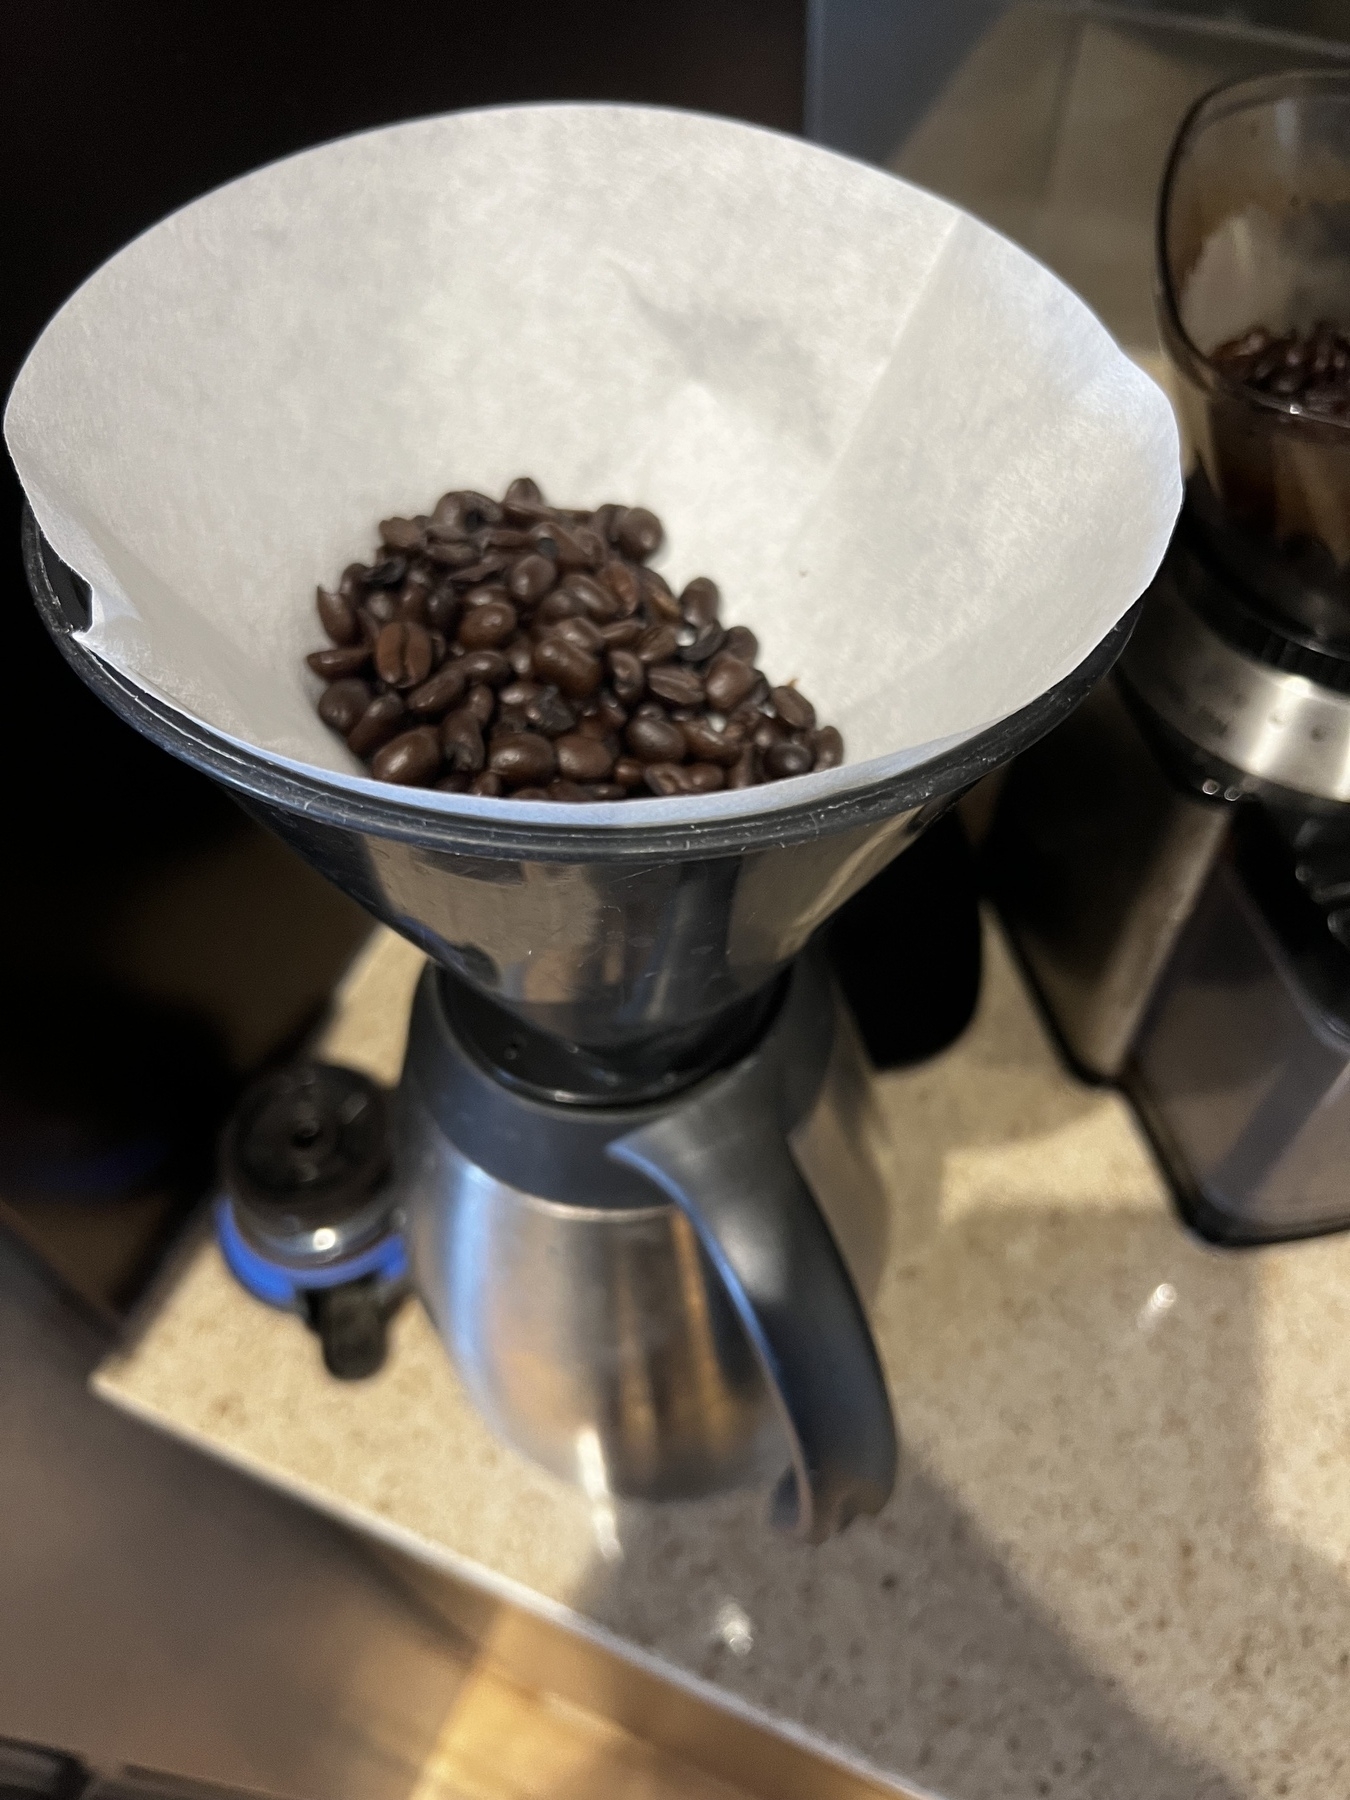 I poured beans into the coffee filter instead of into the grinder. 